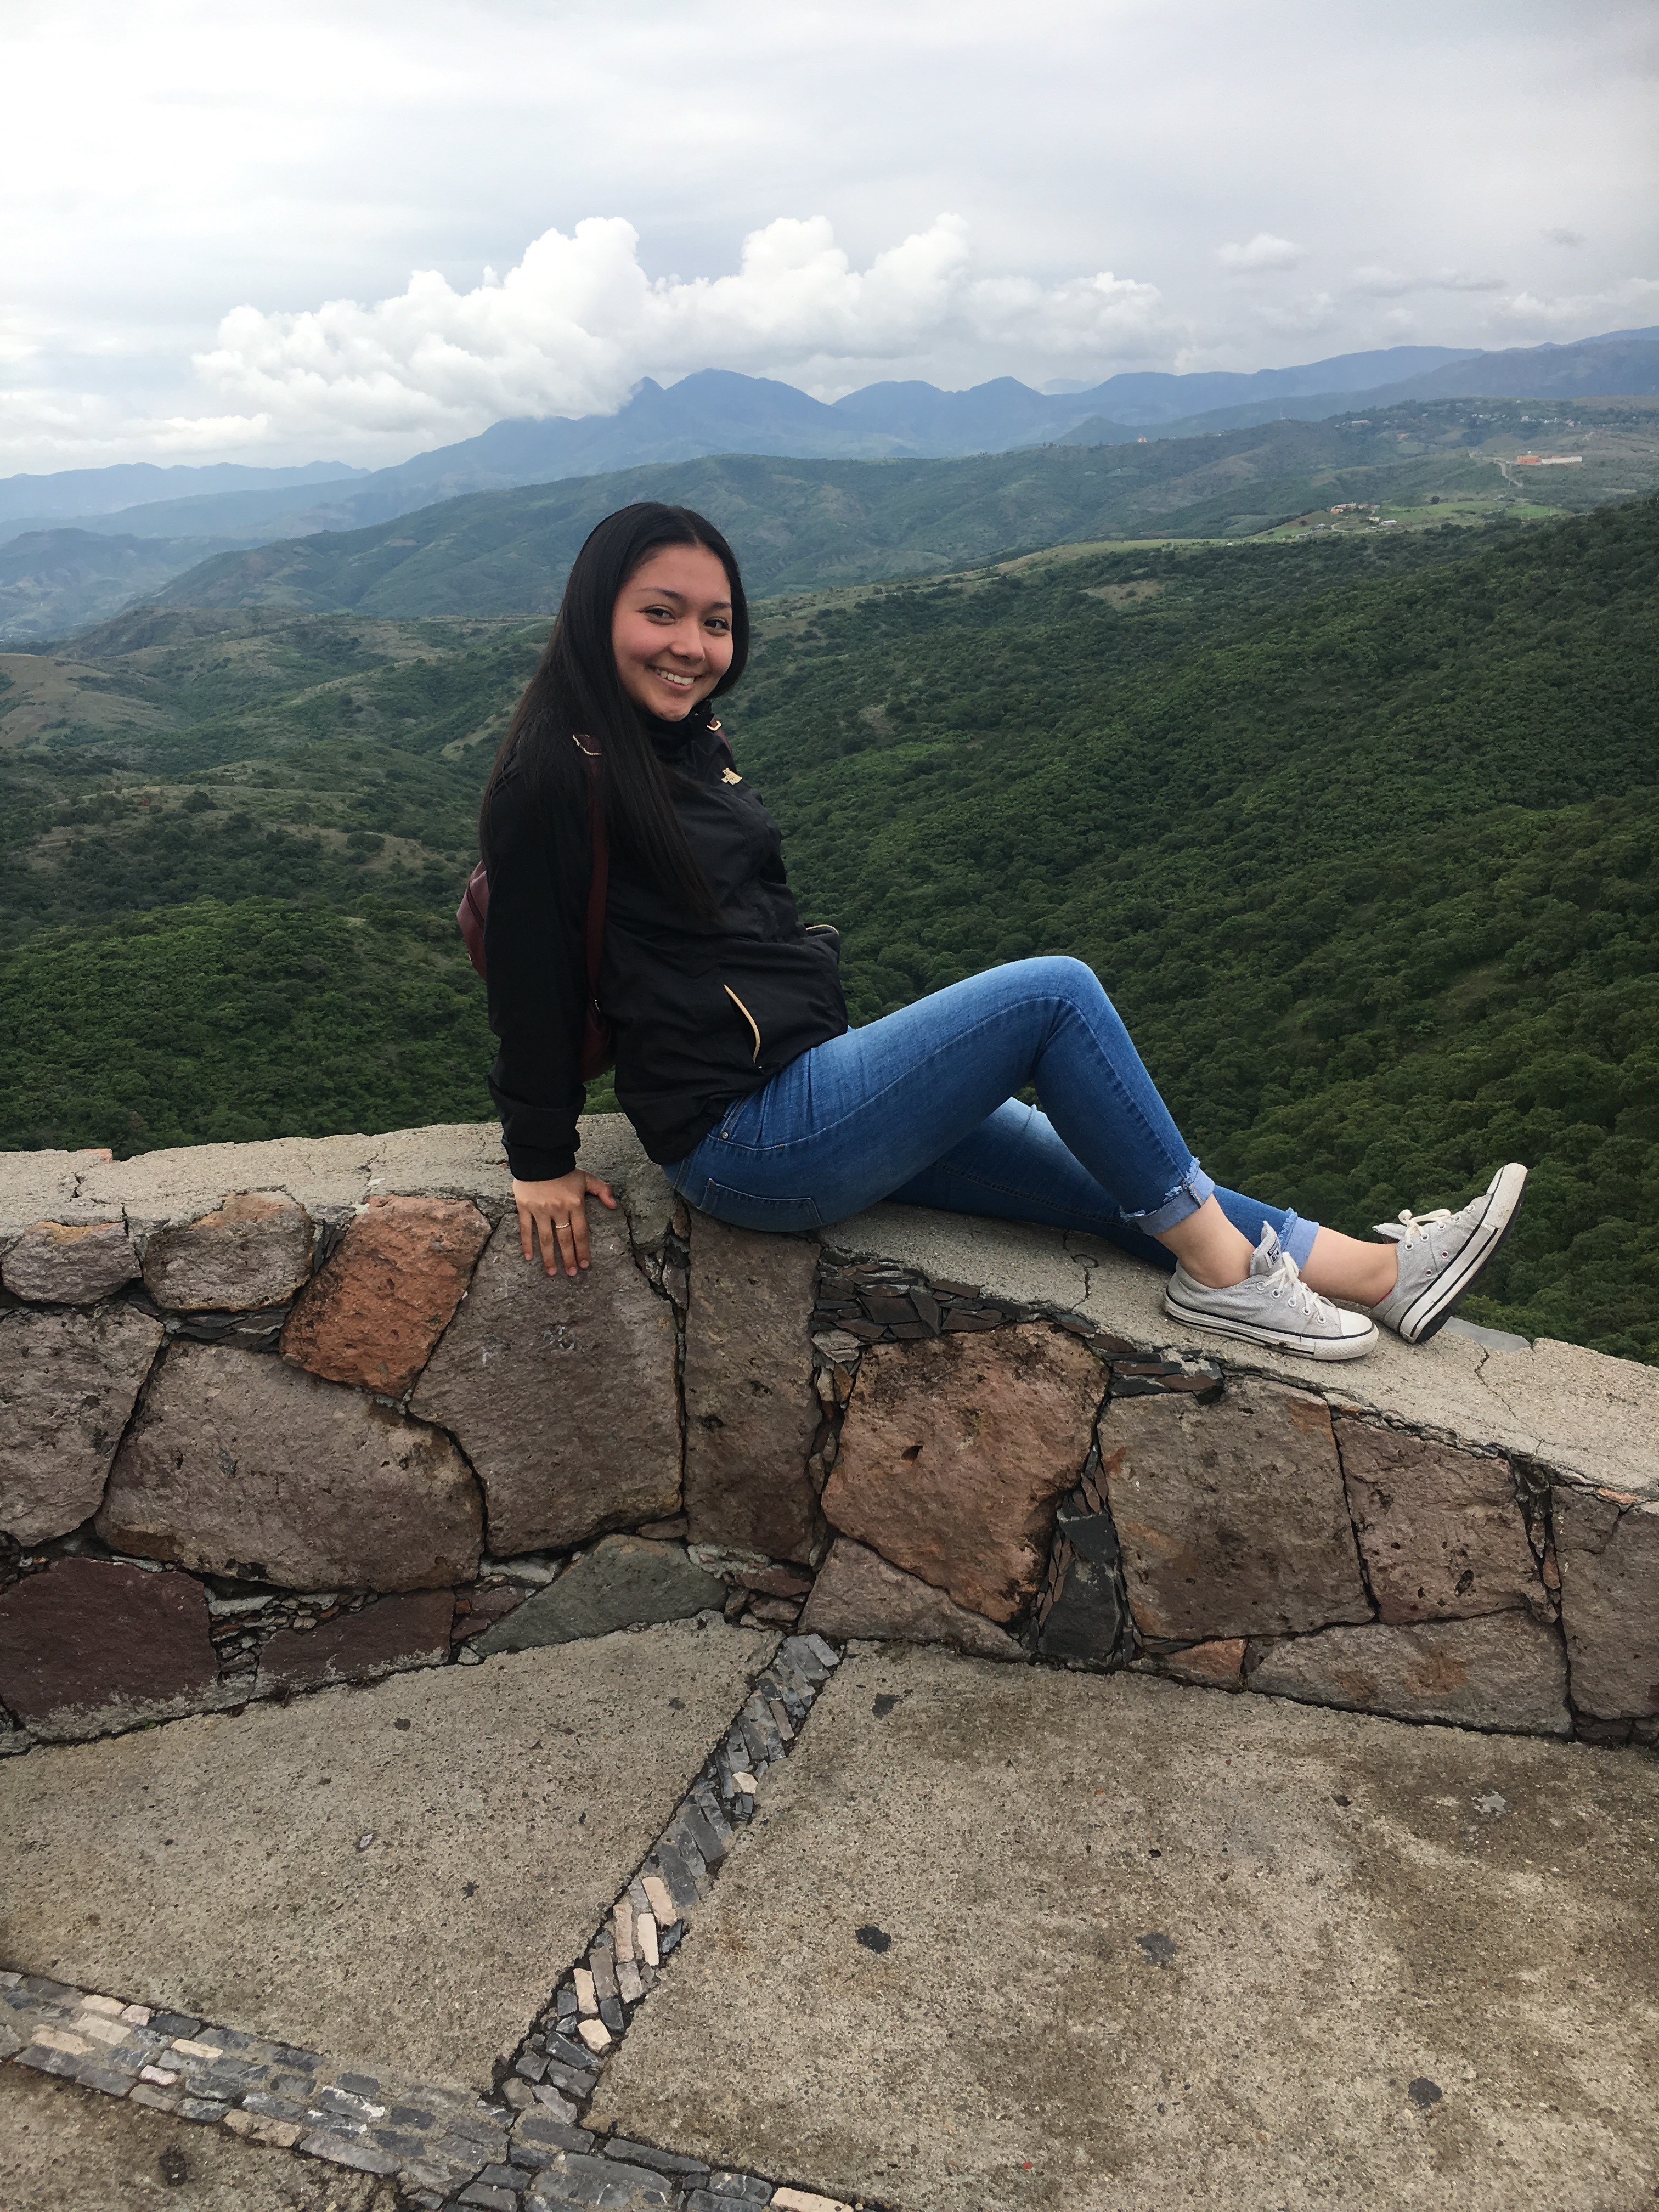 Follow this Fall 2018’s Office of Study Abroad & International Experiences Global Correspondent, Daisy Angel, on her studies in Grenoble, France! Daisy is a UMass Lowell Philosophy major with a French minor studying this summer on a UMass Lowell Partner-led API in Grenoble, France: Université Grenoble Alpes, Intensive Language Studies